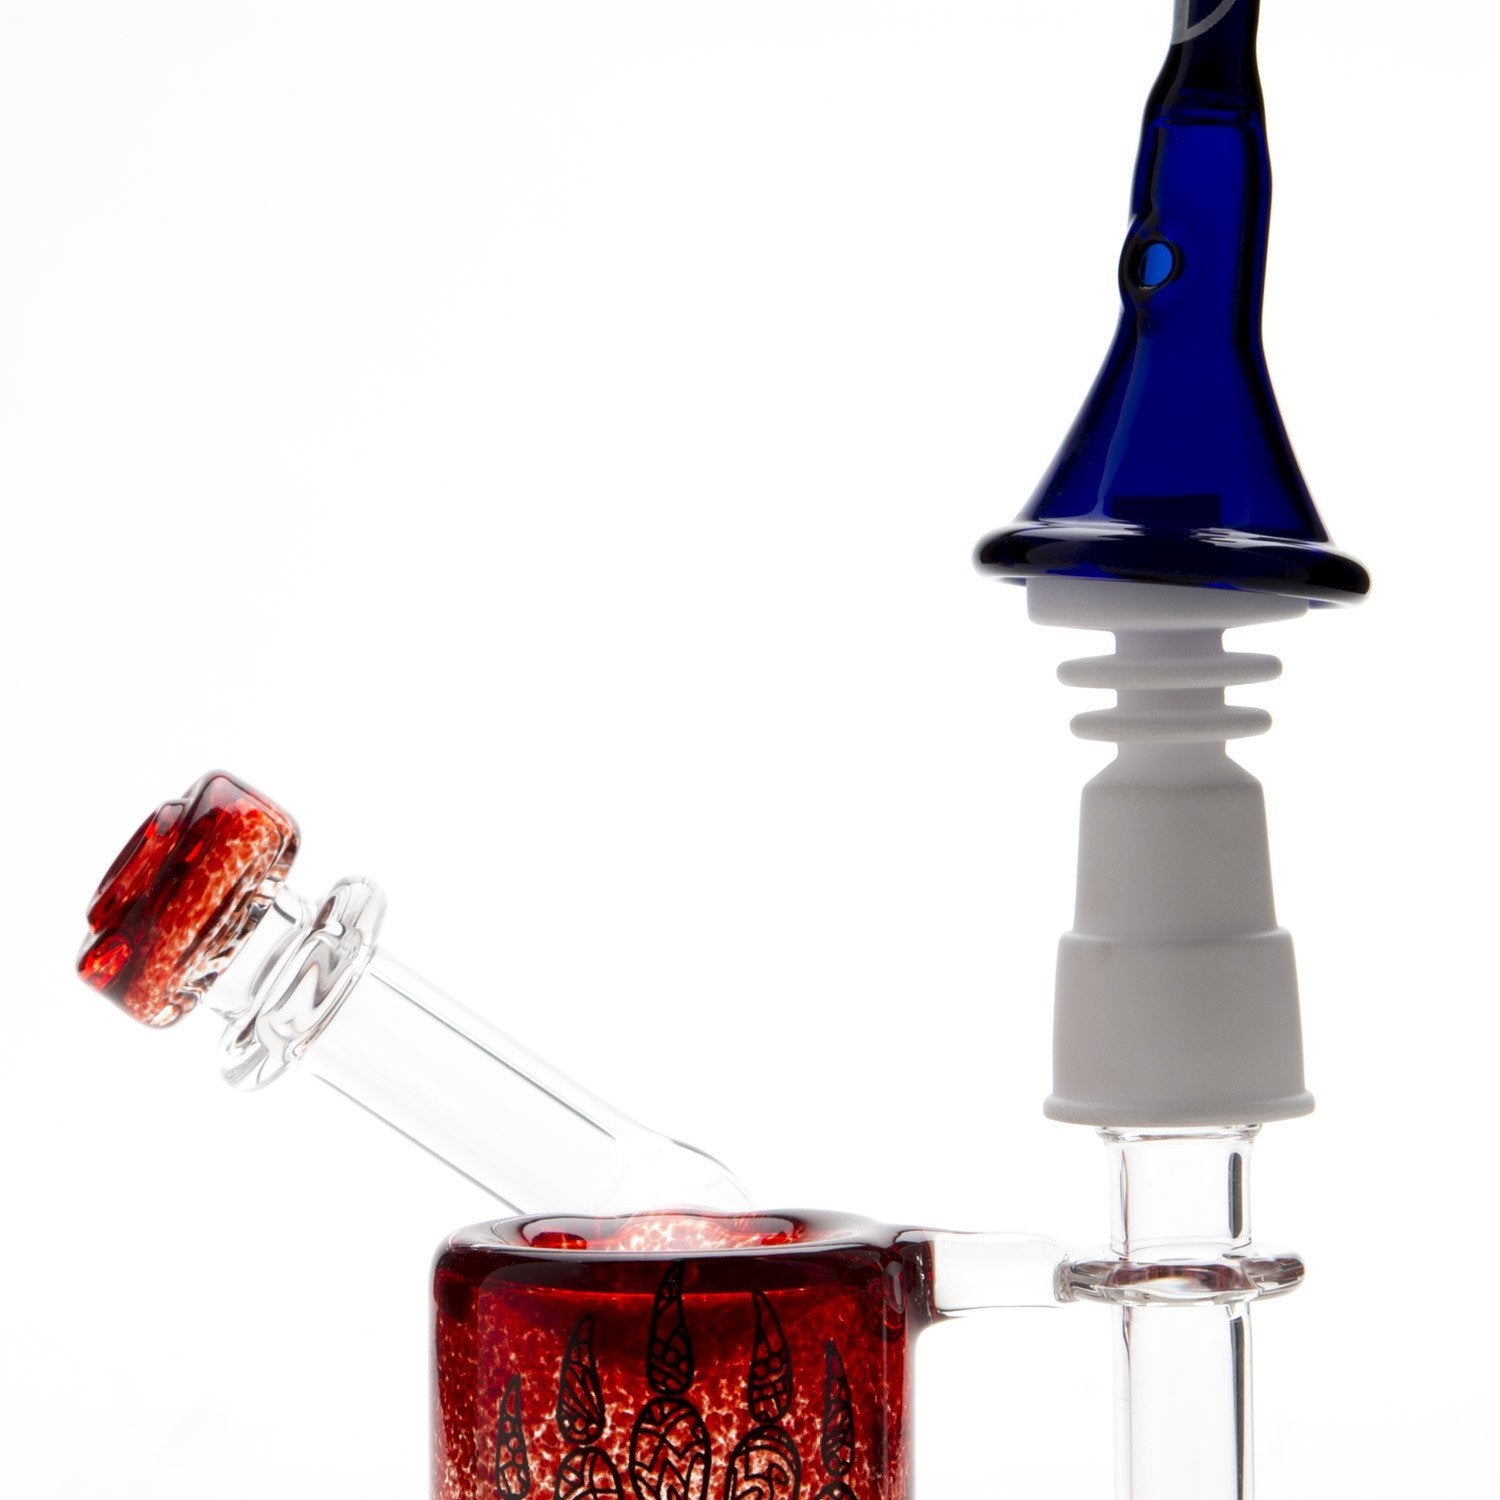 Home Blown Glass Carb Cap Dabber - Blue - 420 Science - The most trusted online smoke shop.